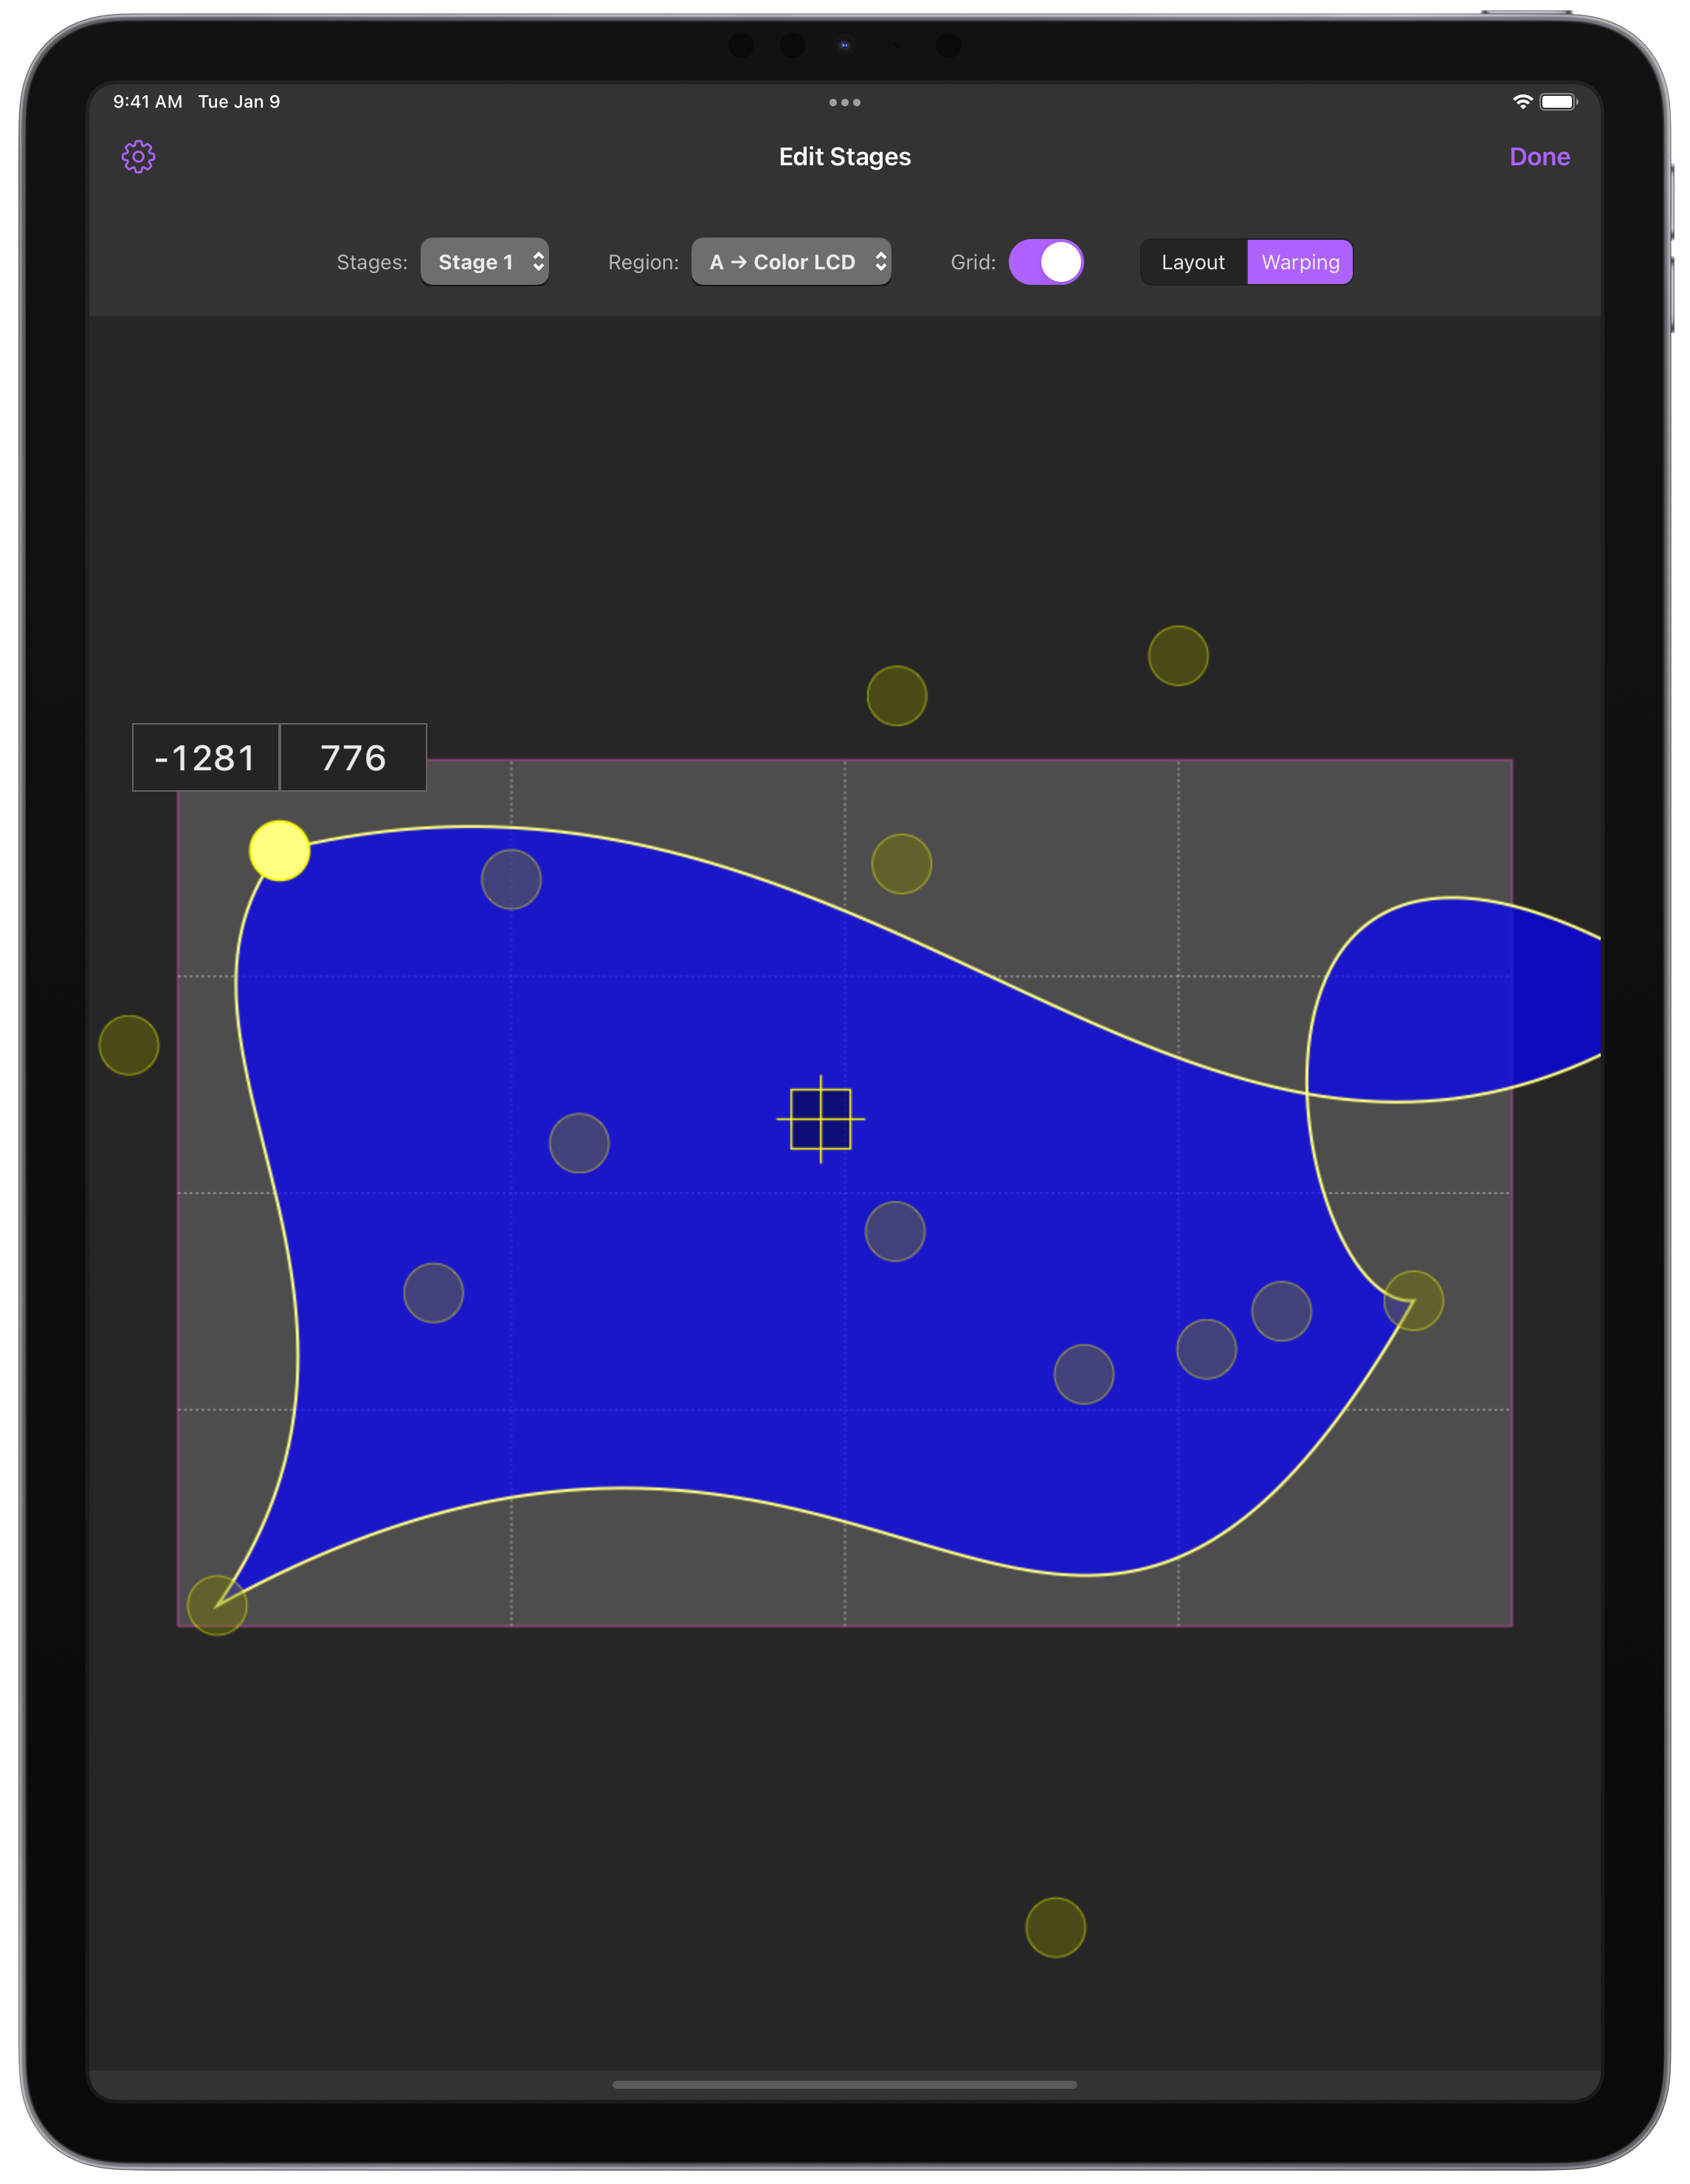 QLab Remote mobile surface editor